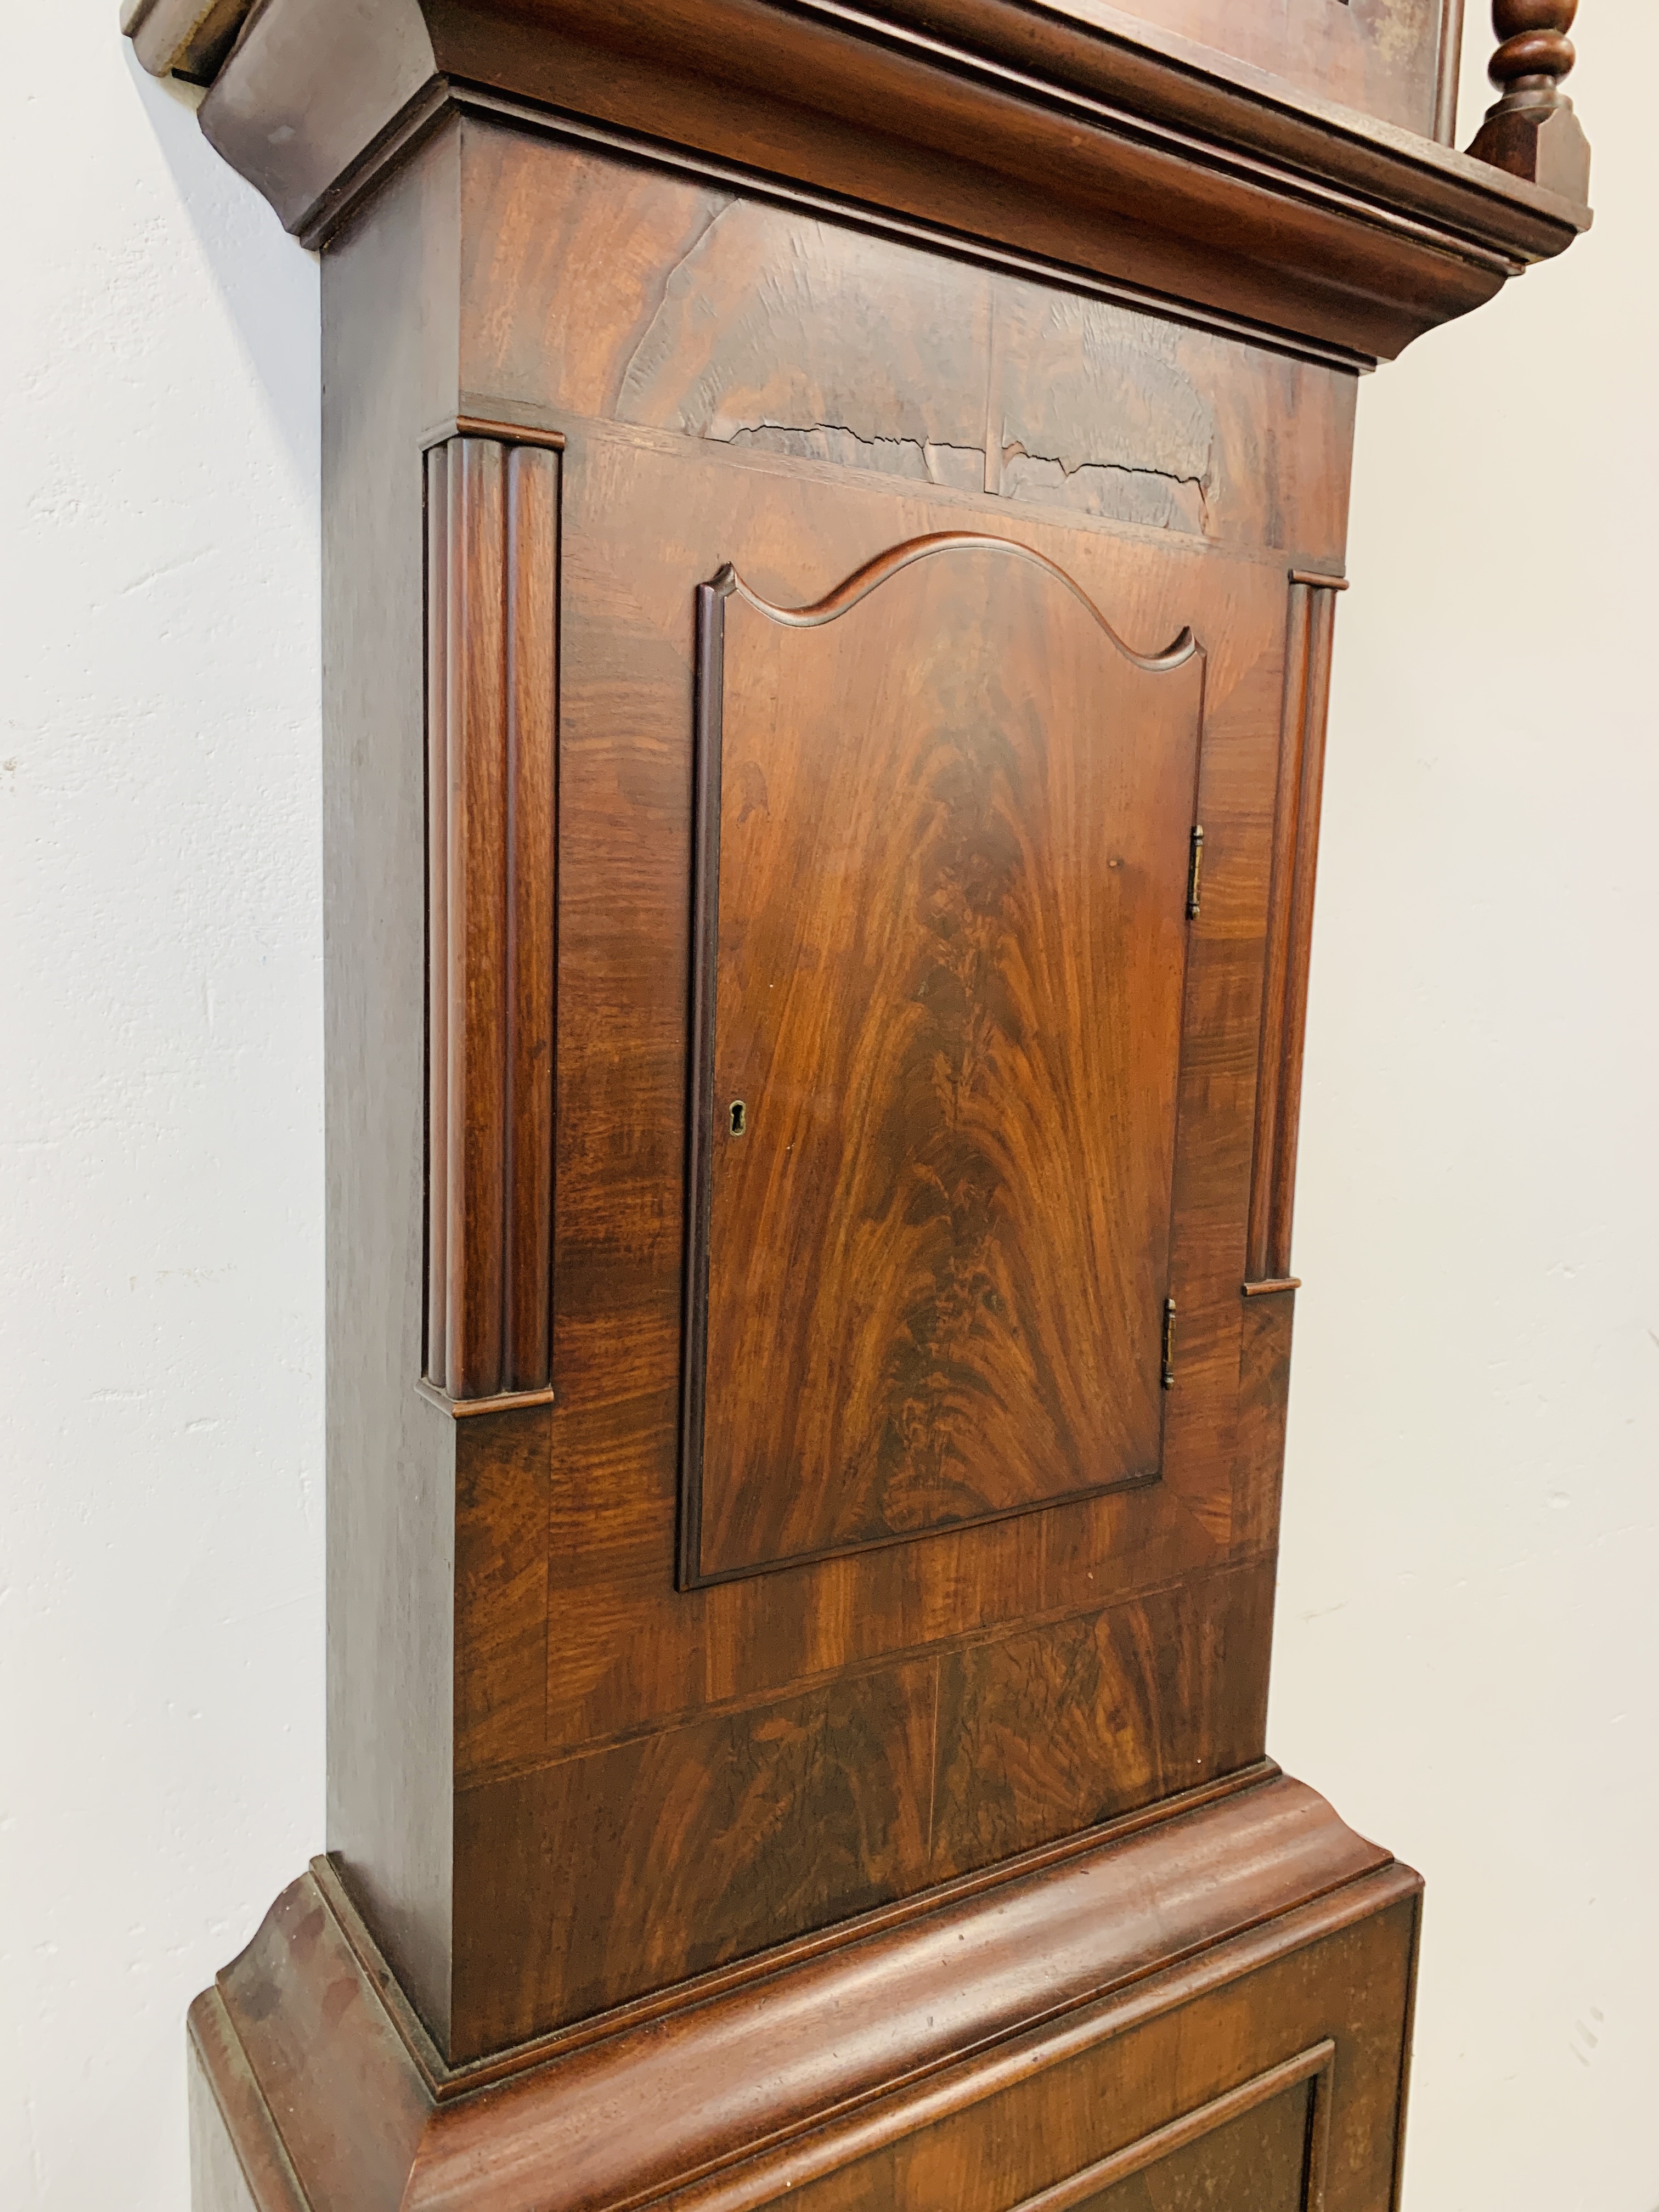 AN ANTIQUE MAHOGANY LONG CASE CLOCK THE HAND PAINTED ARCHED DIAL WITH ROMAN NUMERALS, - Image 8 of 15